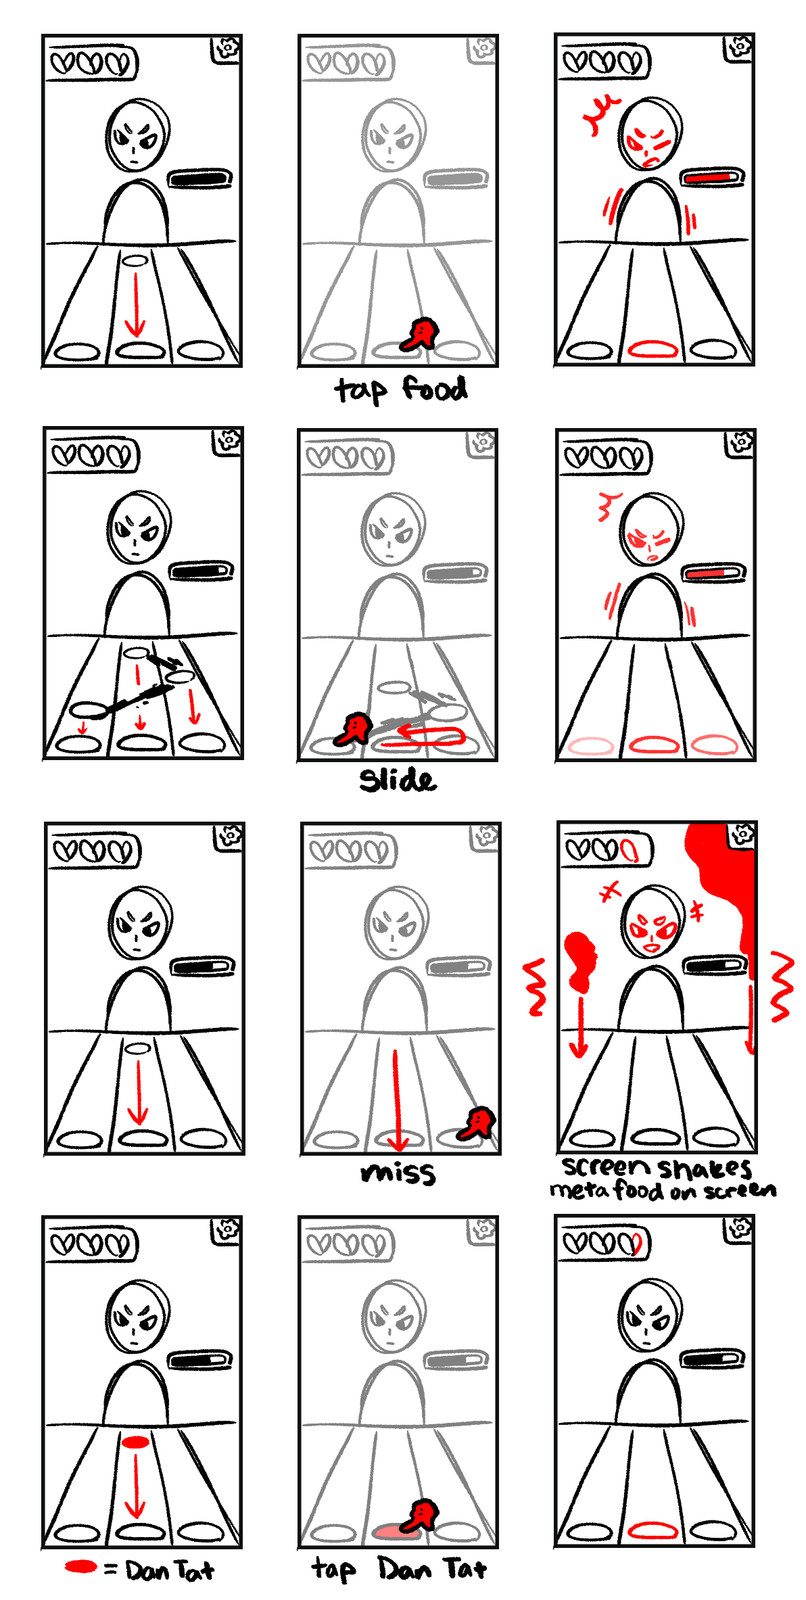 Storyboard of the imagined rhythm game.